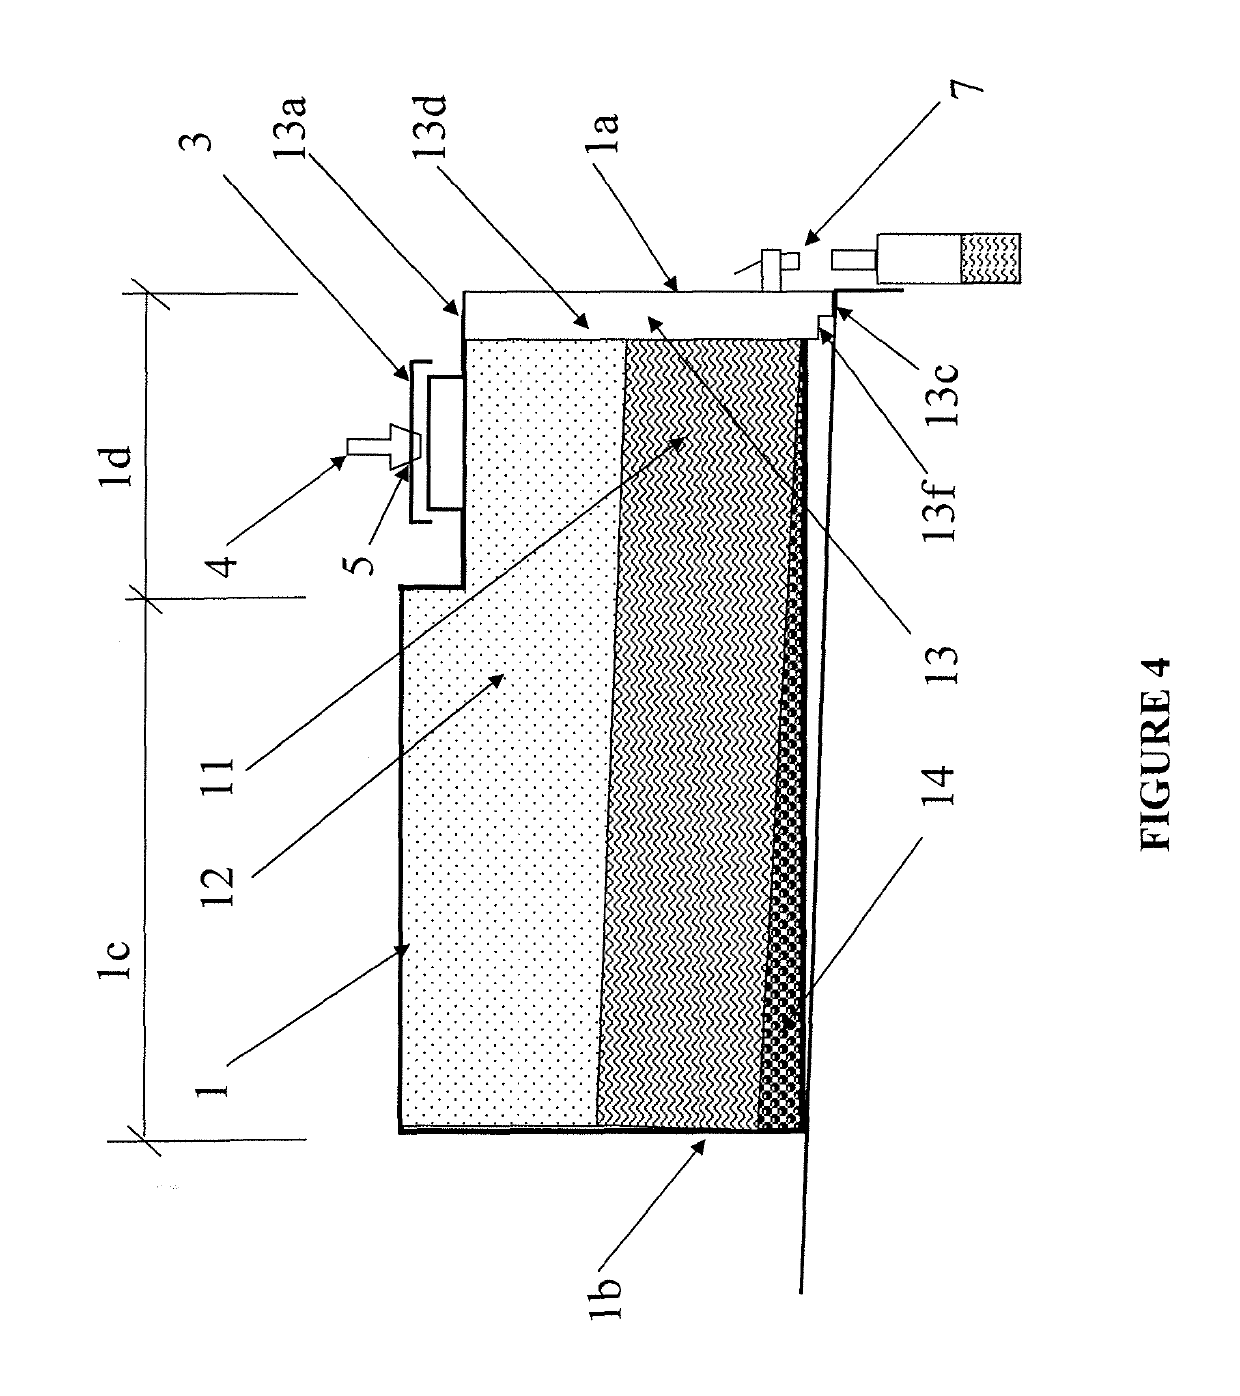 Single stage winemaking apparatus and method